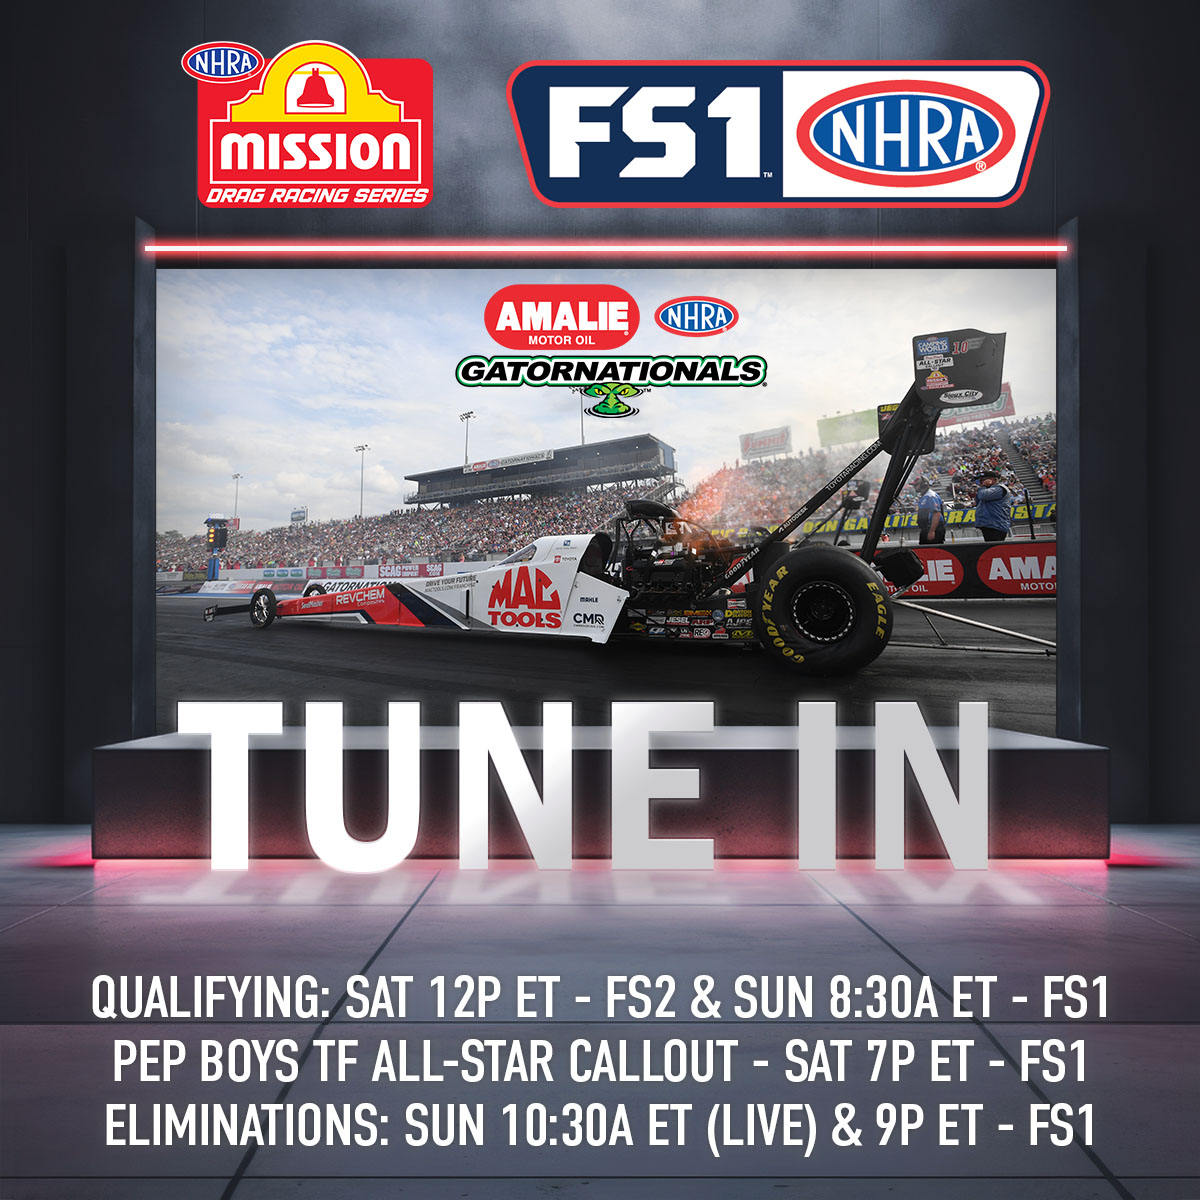 Tune in for the Amalie Motor Oil NHRA Gatornationals THIS weekend at @GvilleDragRaces! Get tickets to #northwestnats here: pacificraceways.com/nhra/event-tic… #Gatornats #SpeedForAll #NHRAonFOX